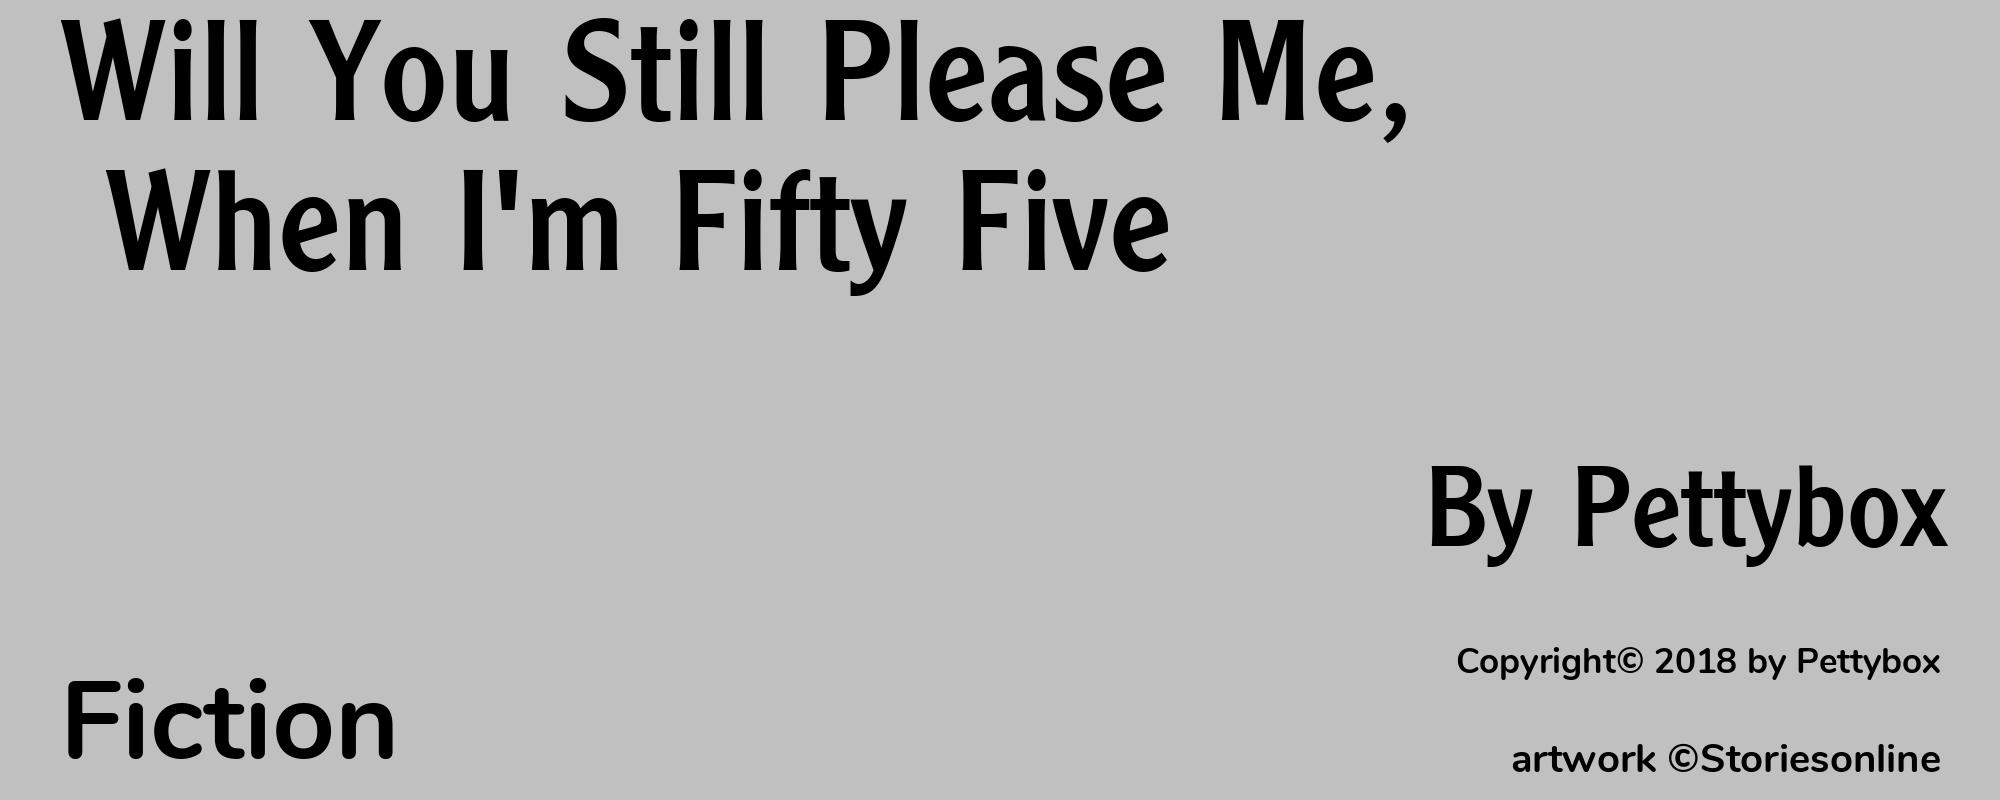 Will You Still Please Me, When I'm Fifty Five - Cover